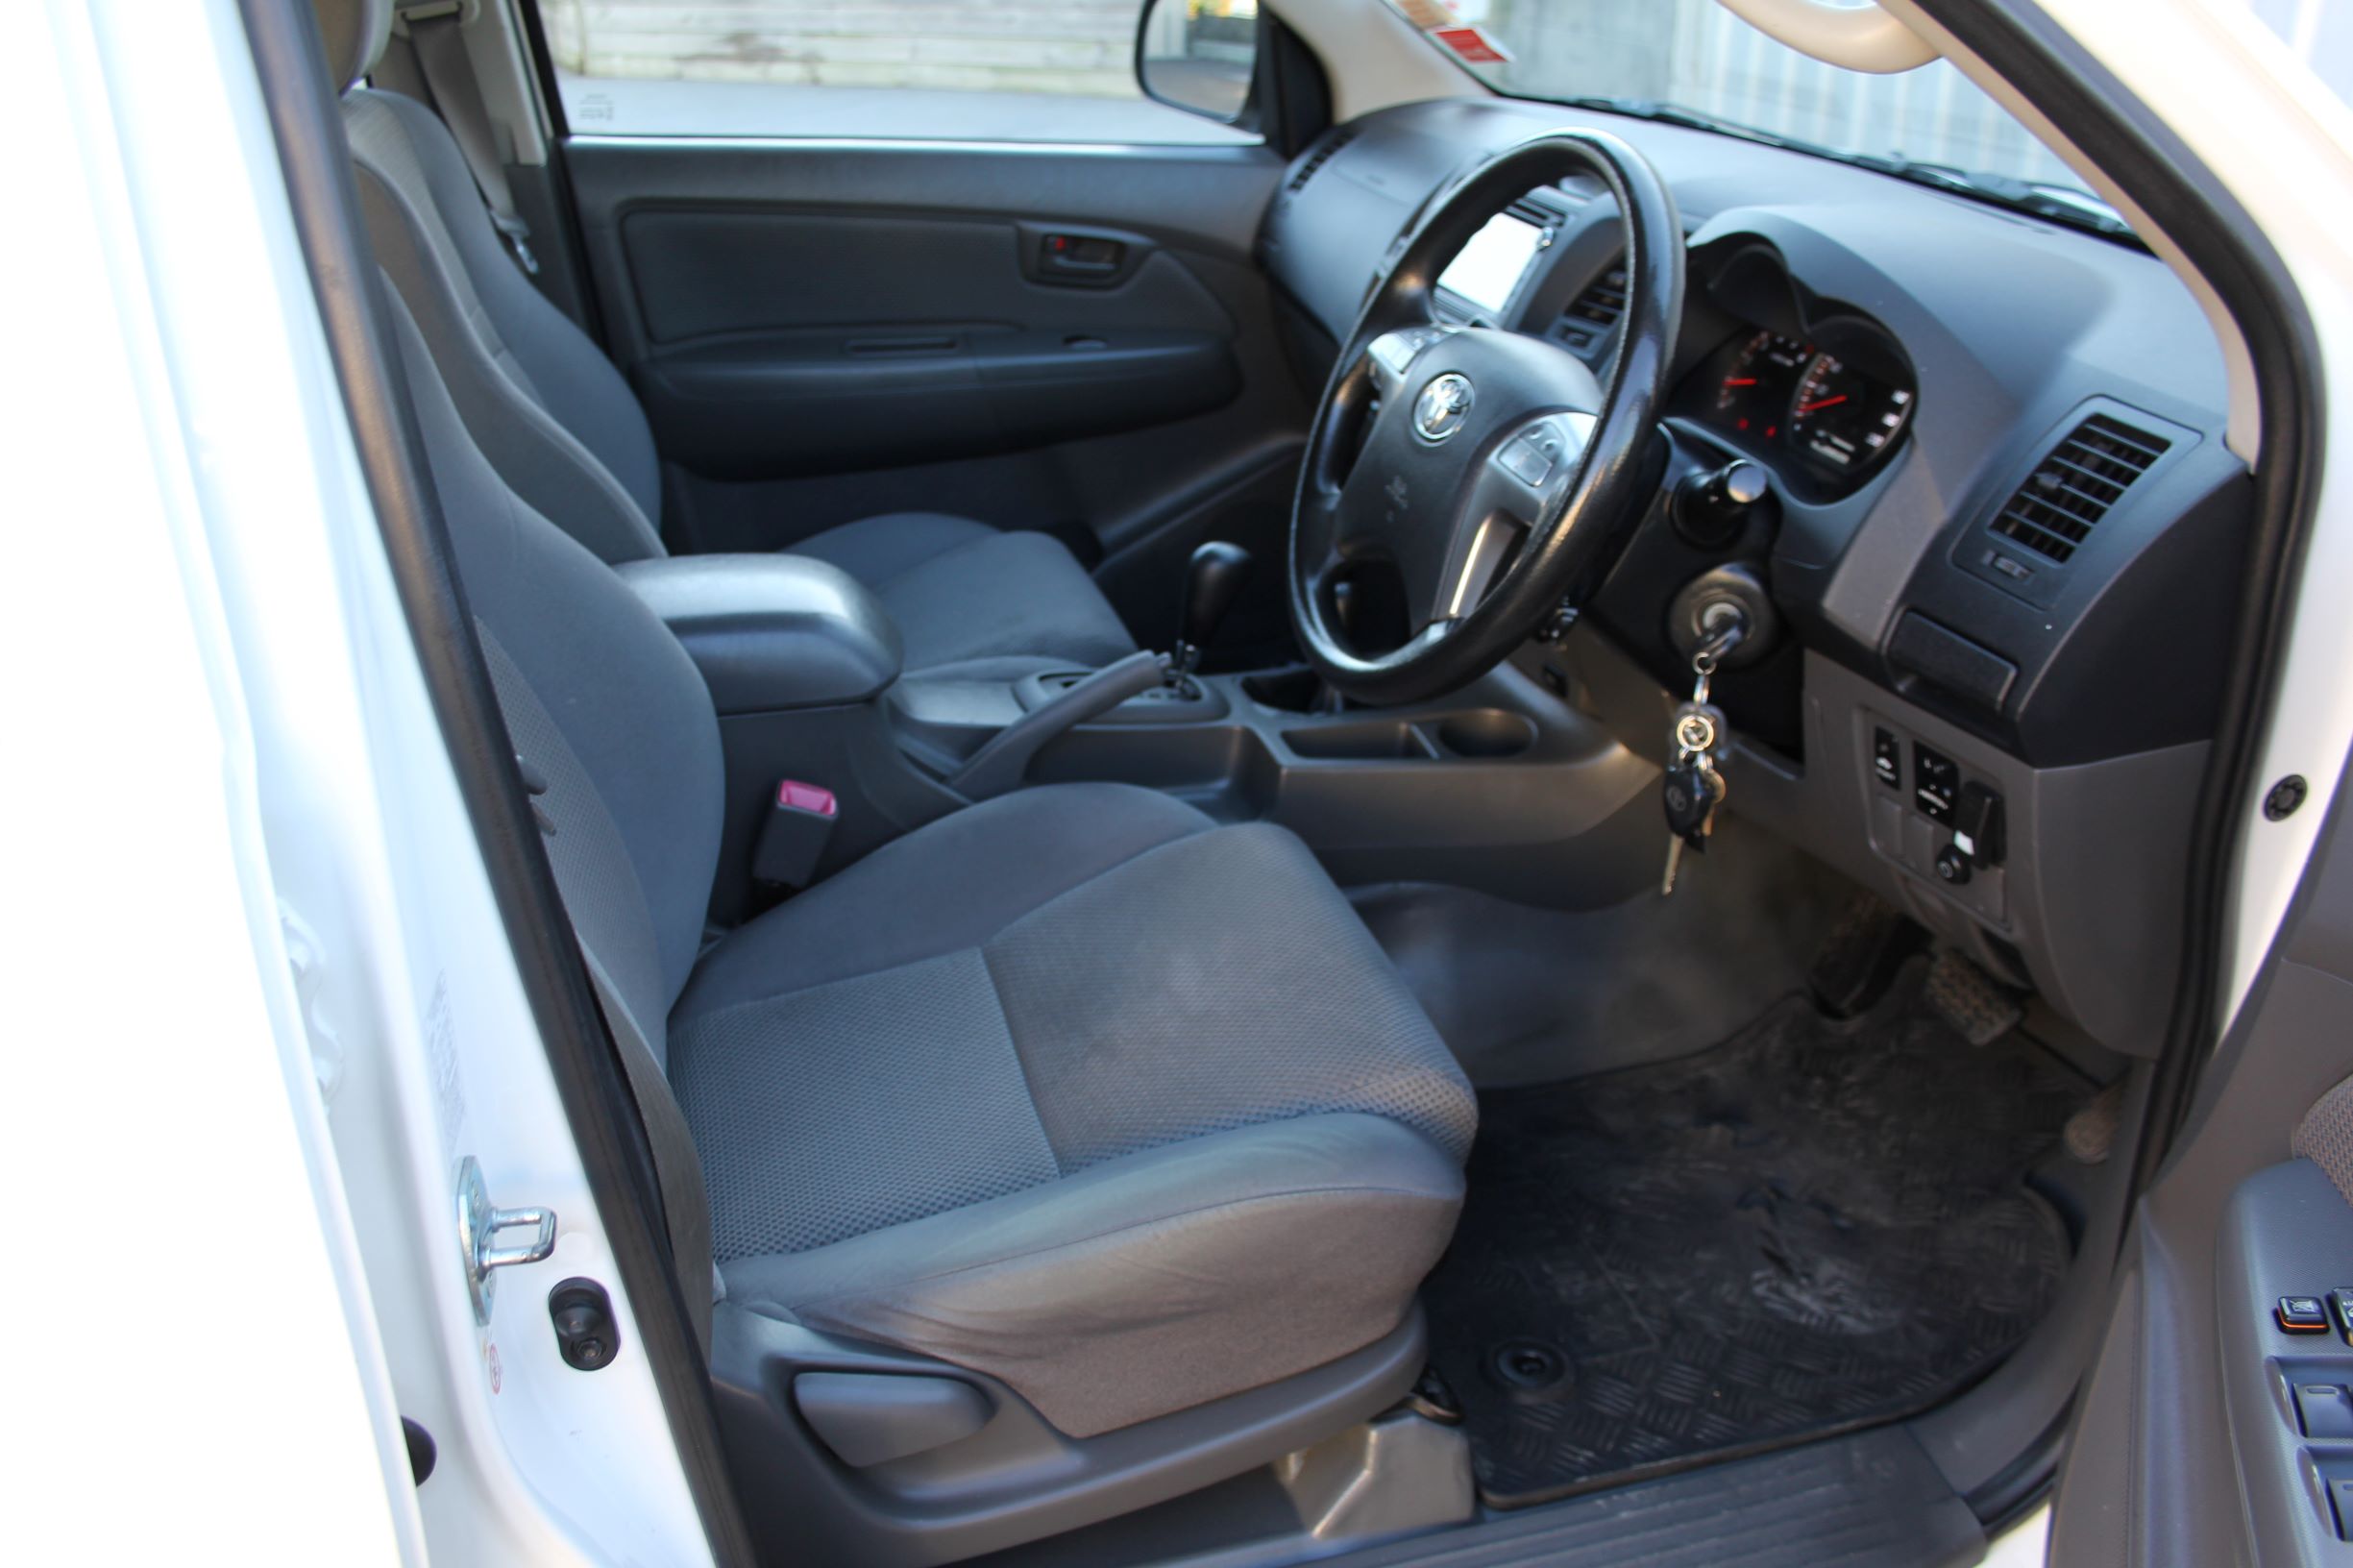 Toyota Hilux 4wd 2015 for sale in Auckland